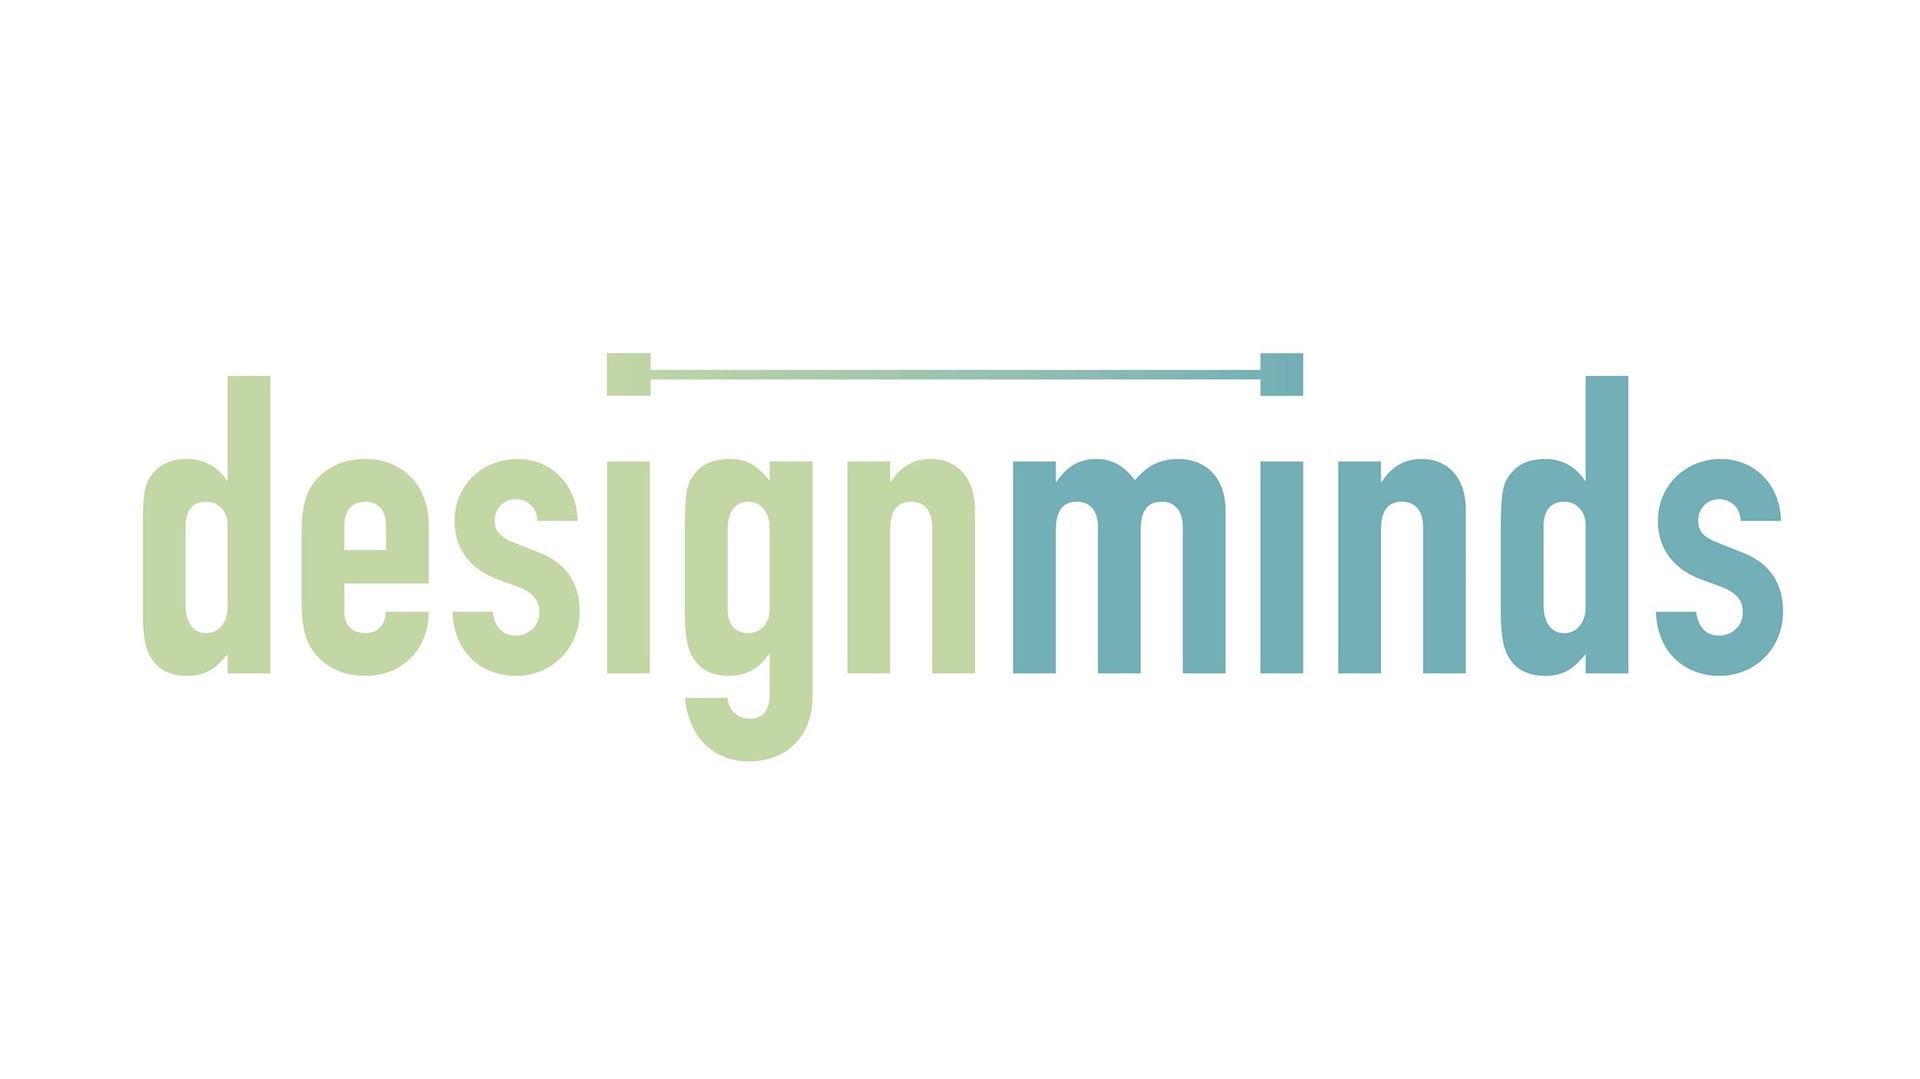 Blue and green logo of "design minds" is centered 